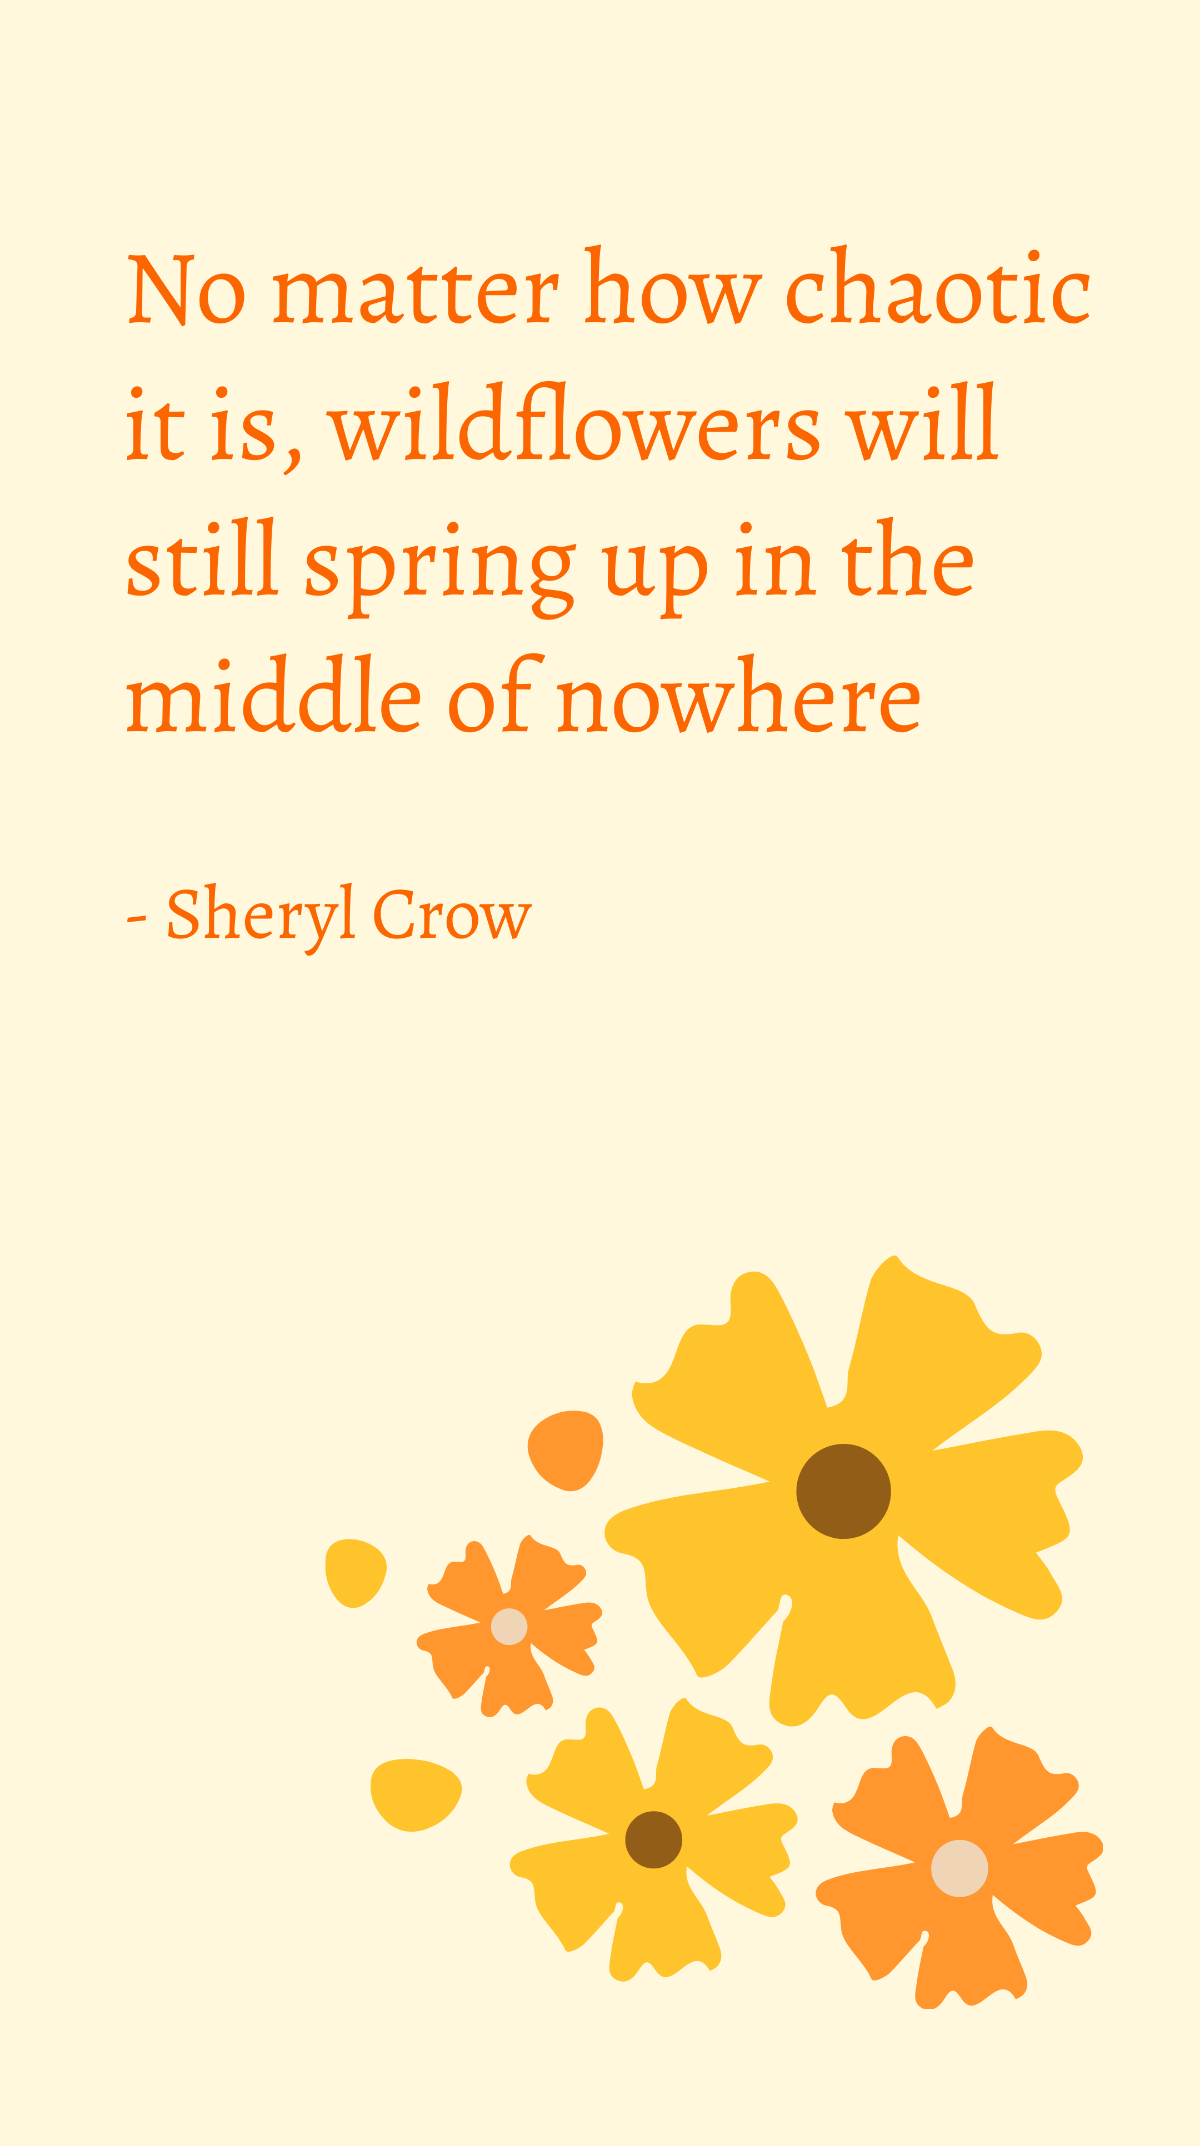 Free Sheryl Crow - No matter how chaotic it is, wildflowers will still spring up in the middle of nowhere Template